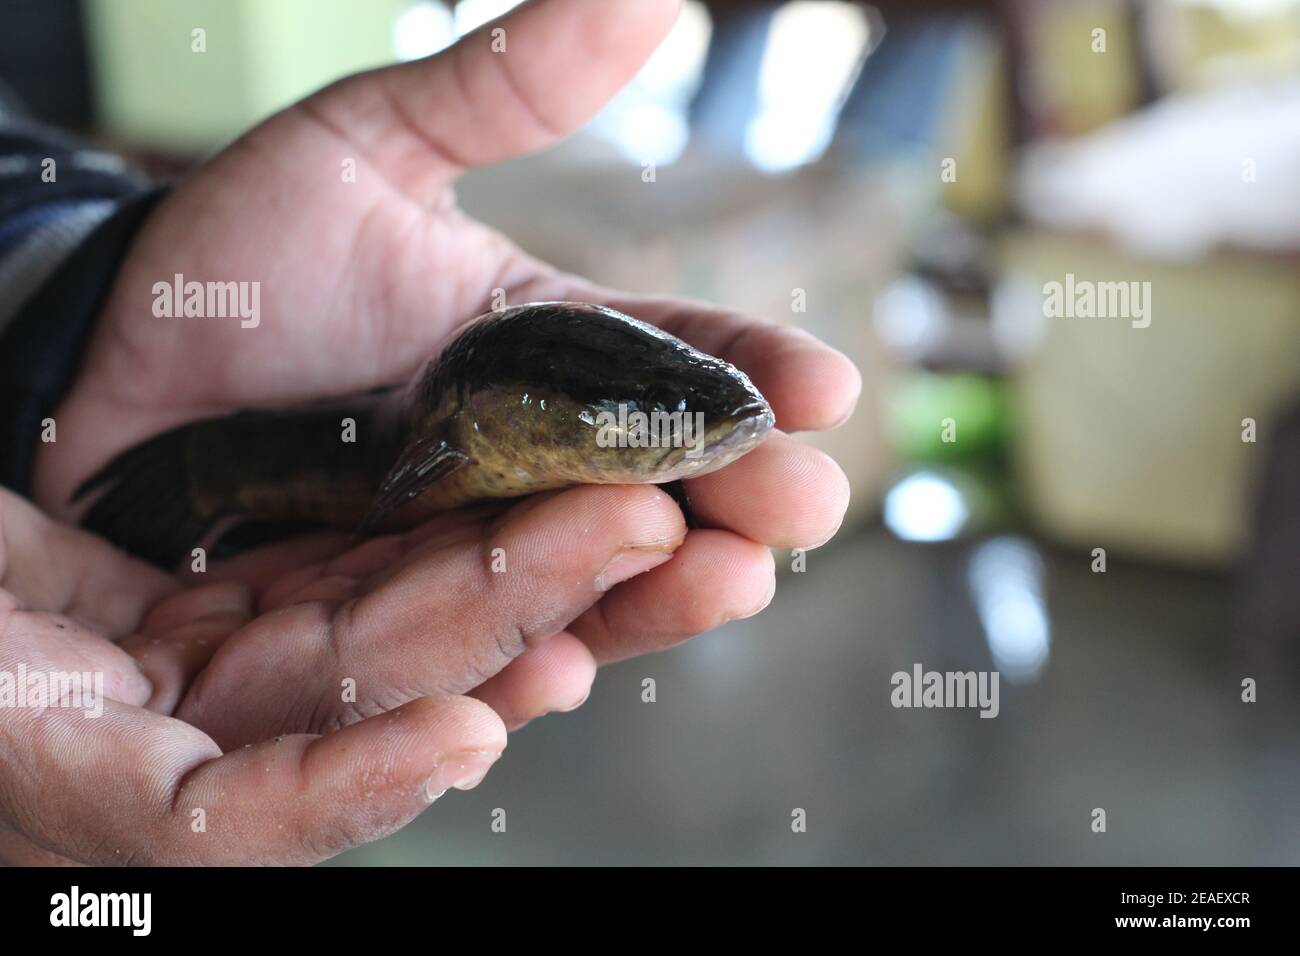 snakehead murrel fish in hand murrel fish culture in india nutrion rich murrel fish in hand in indian fish market Stock Photo